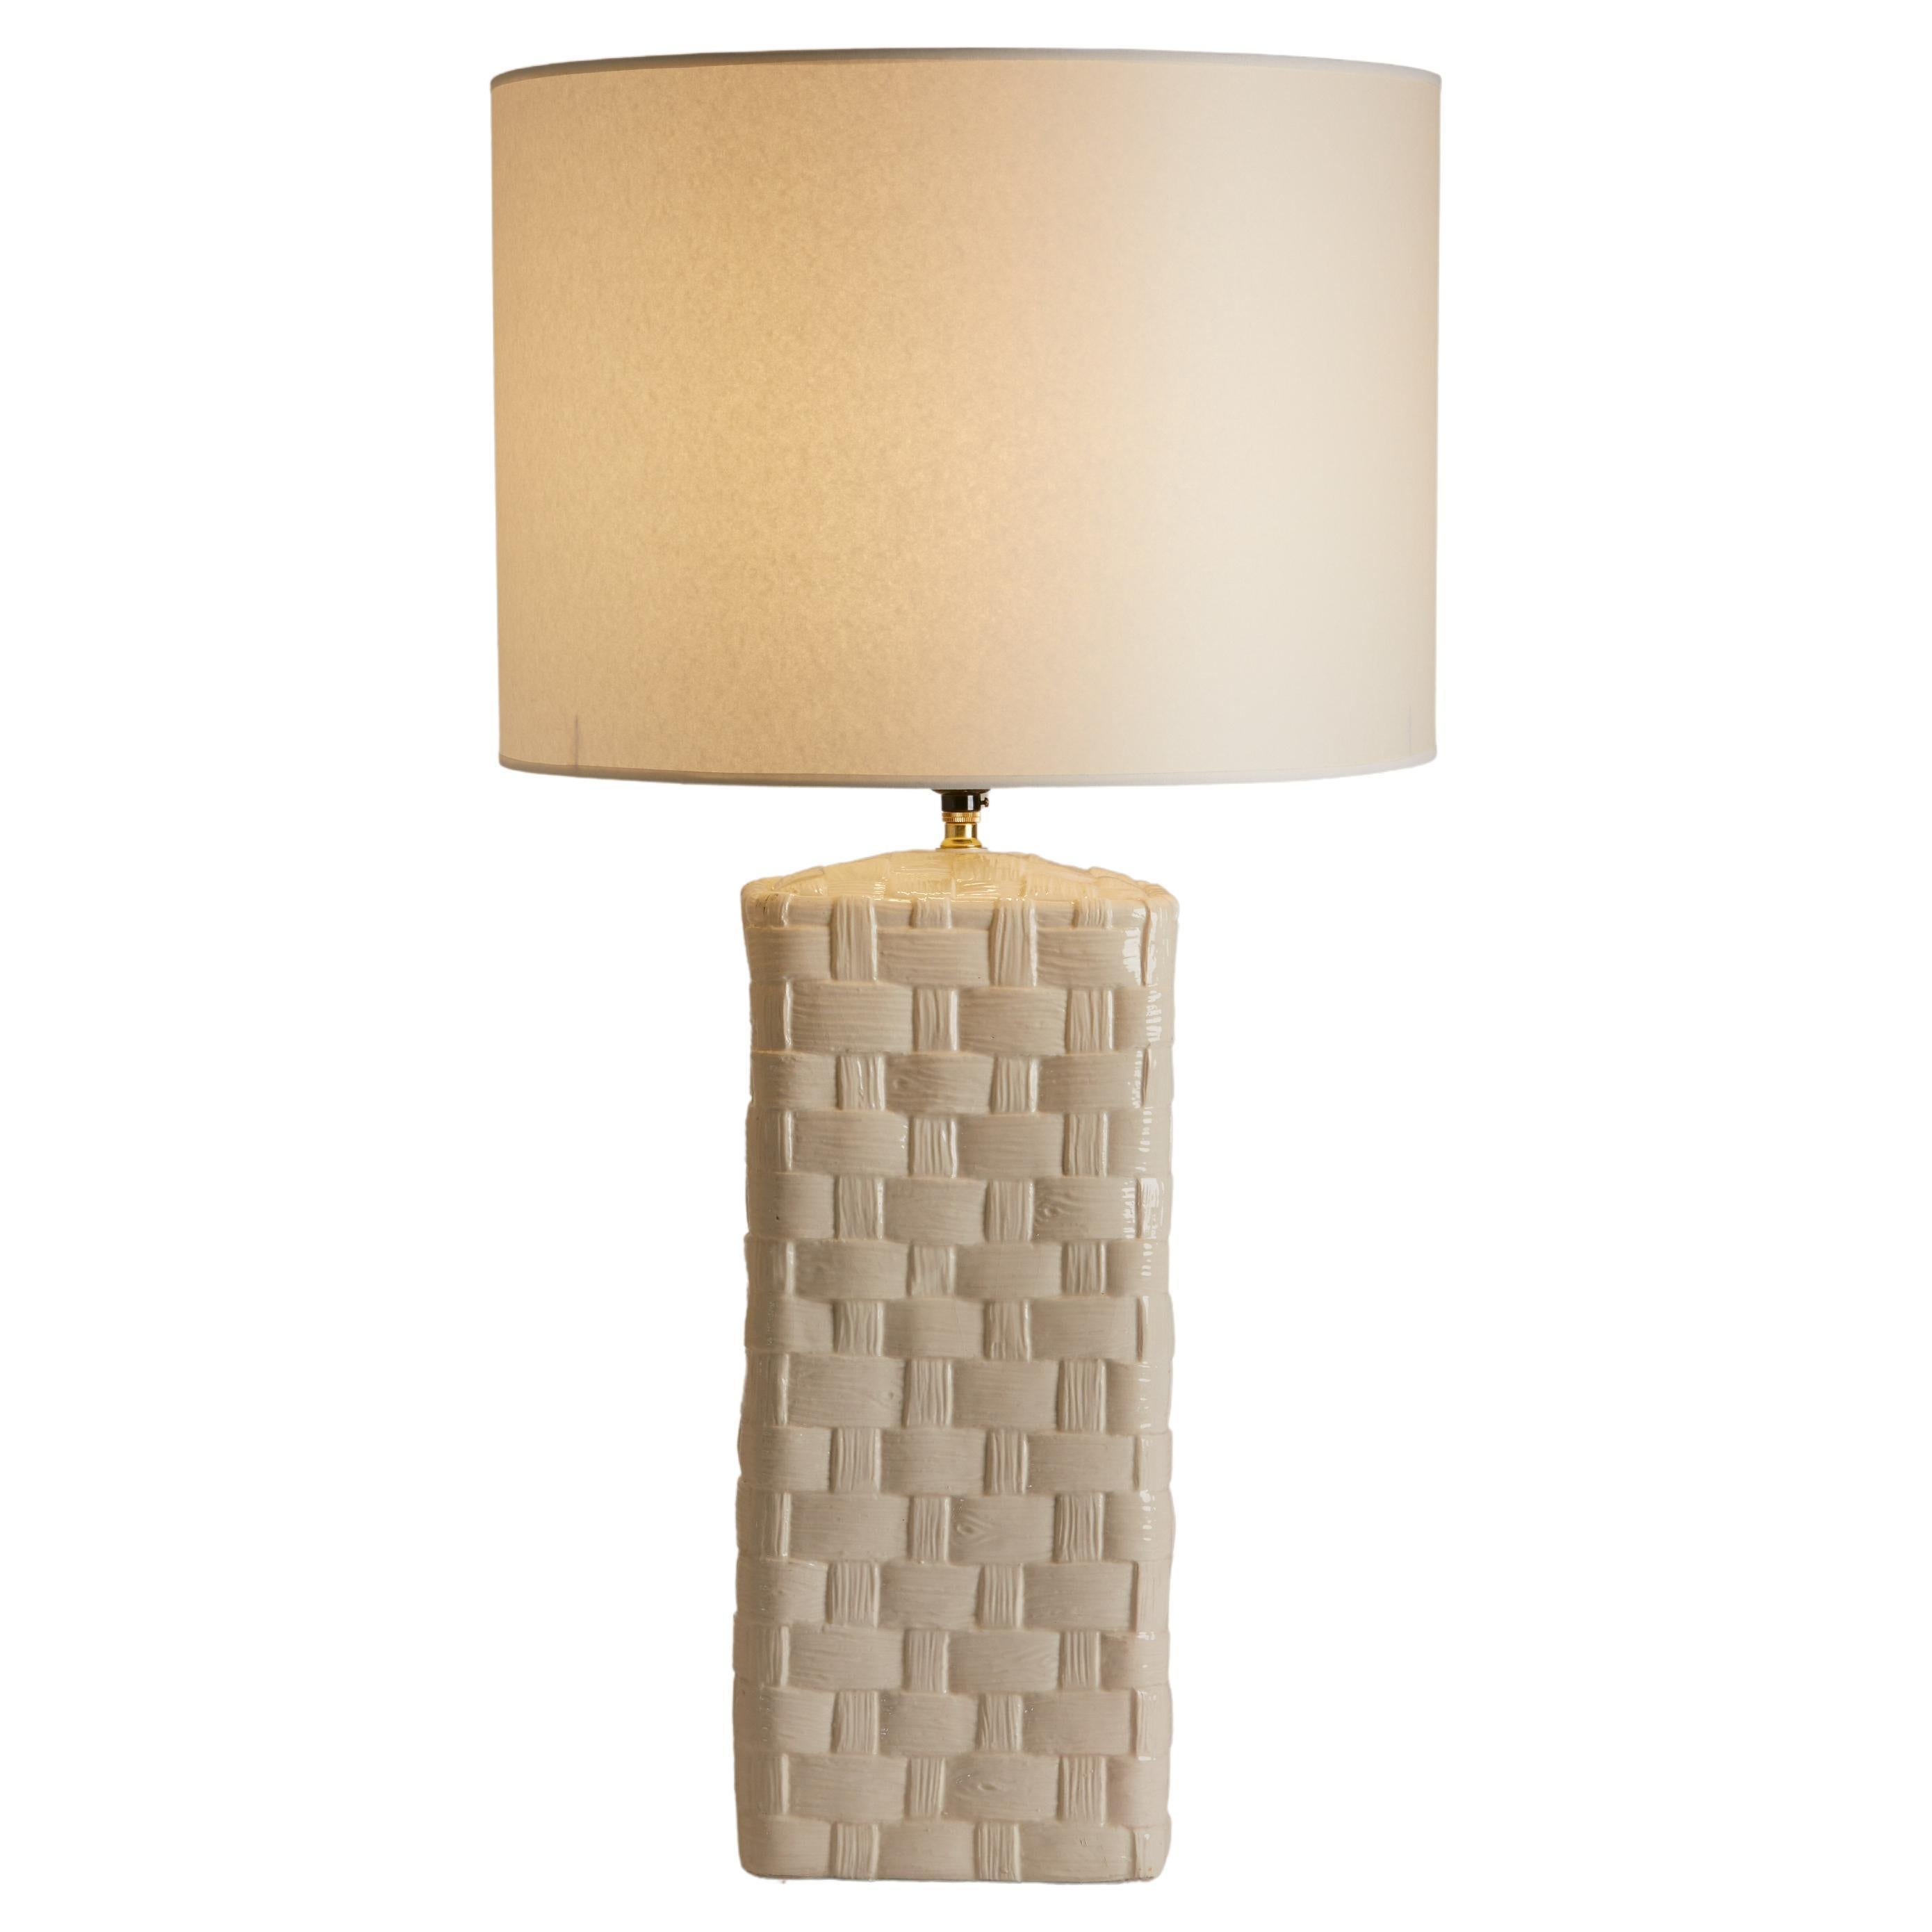 1970s French Faux Basket Weave White Ceramic Lamp For Sale